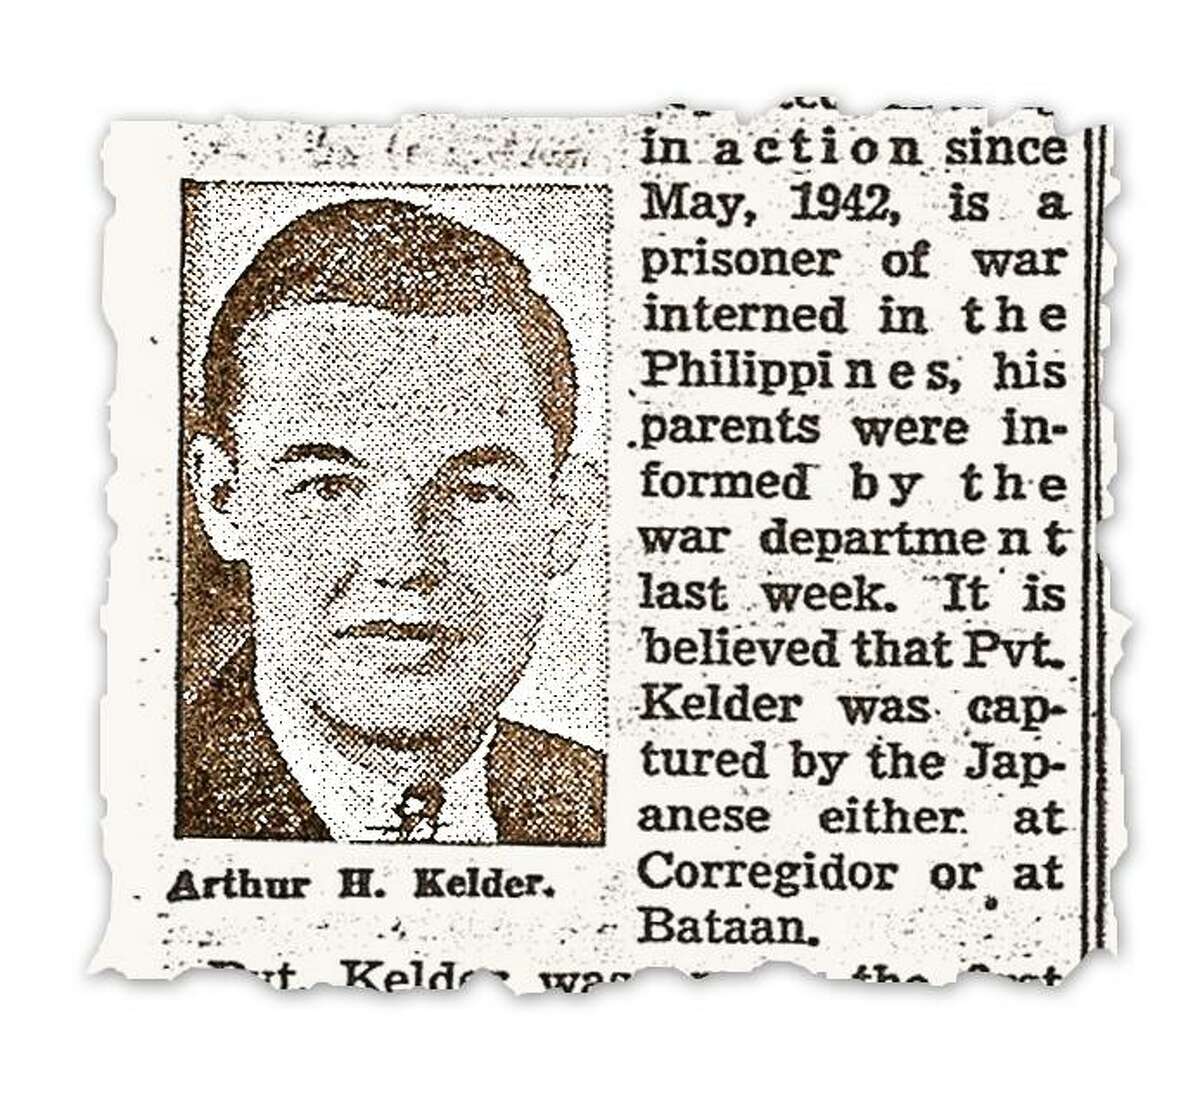 Clip from unknown local newspaper in 1942 about Kelder being a prisoner of the Japanese. courtesy photo images for daily story slugged Bataan_Missing of Army Pvt. Arthur "Bud" Kelder, who survived the Bataan Death March but died as a Japanese prisoner; his family is trying to have his remains recovered from a grave in the Philippines and reinterred in his family mausoleum in Chicago.